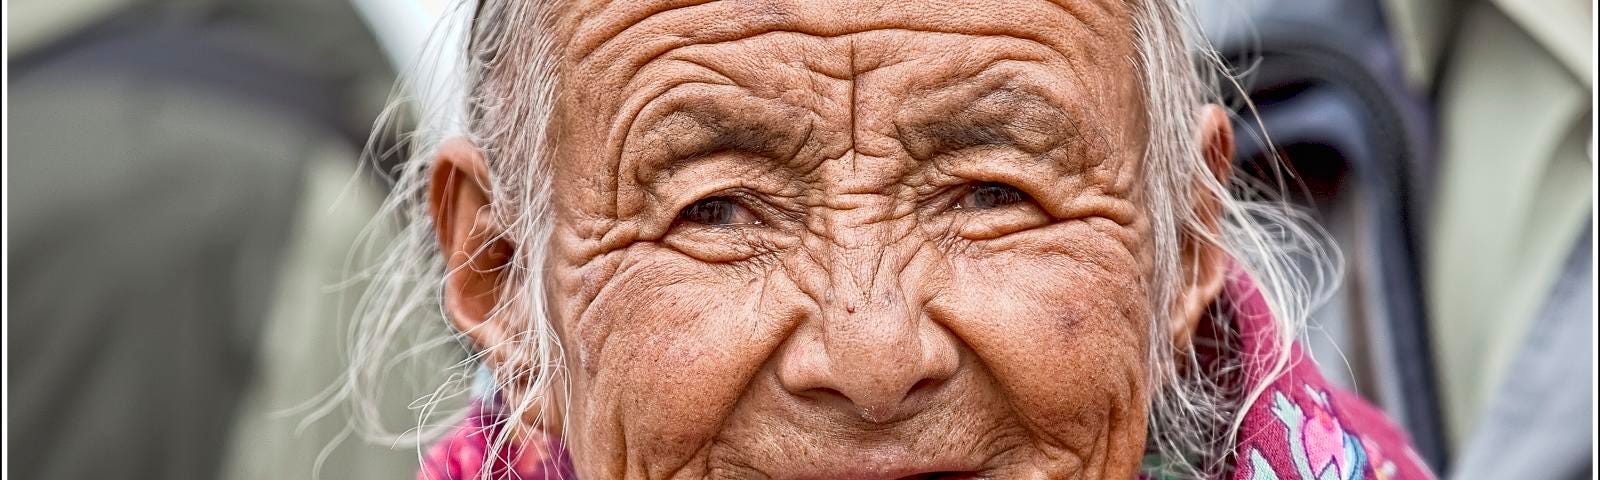 Old Tibetan woman with many wrinkles and a smile that stands above the suffering. Suffer consciously is the end of suffering.